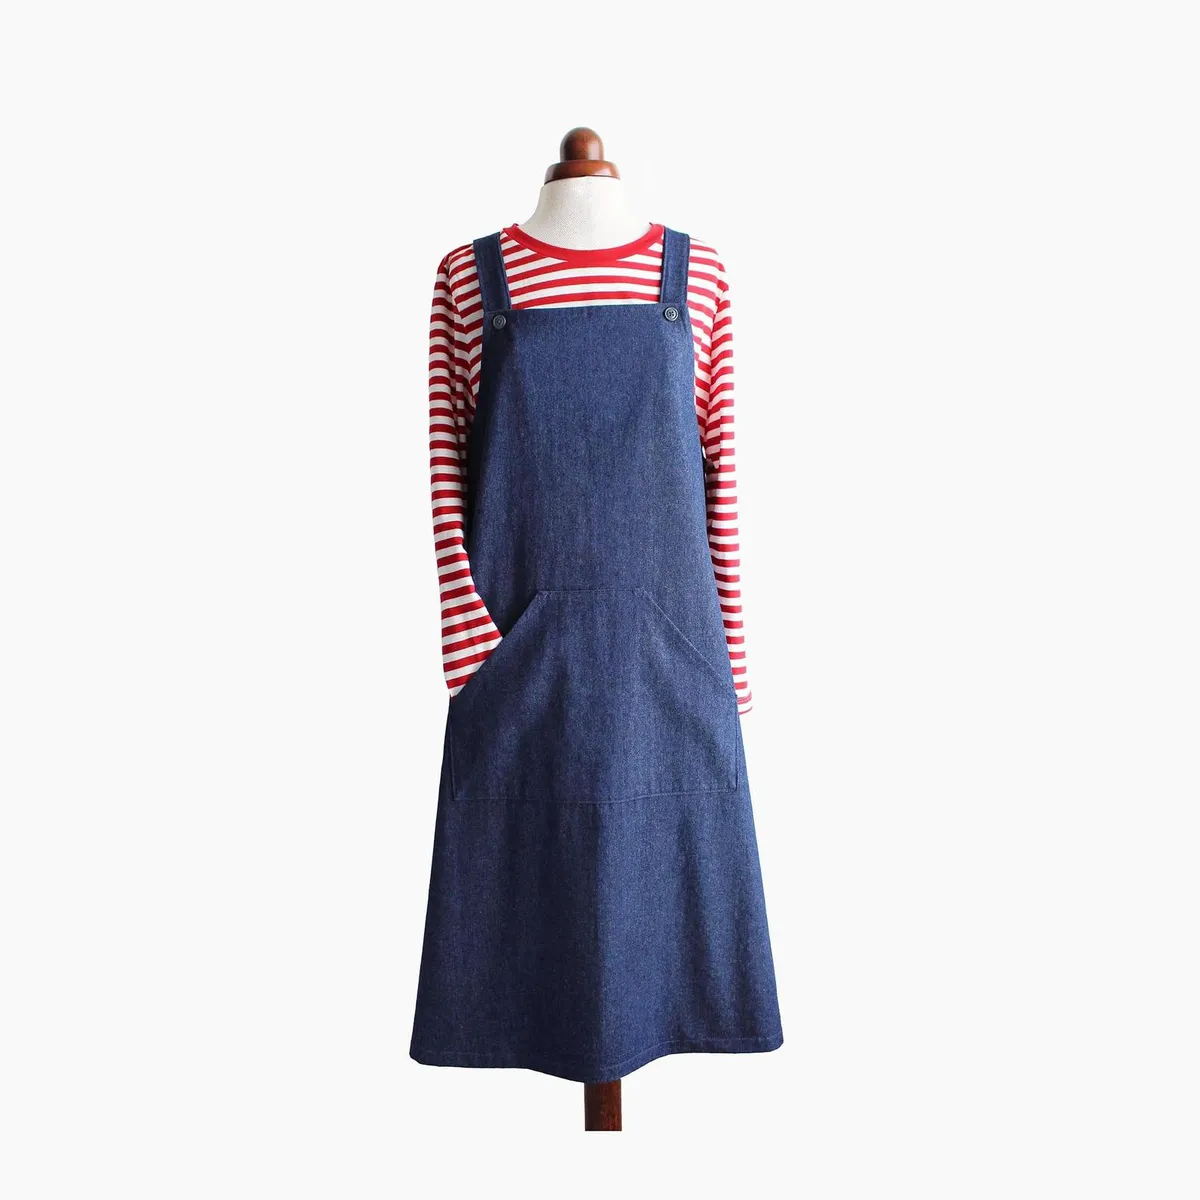 Denim York Pinafore – Vacation Sewing – Kaleidothought  Pinafore dress  pattern, Denim pinafore dress, Pinafore dress outfit